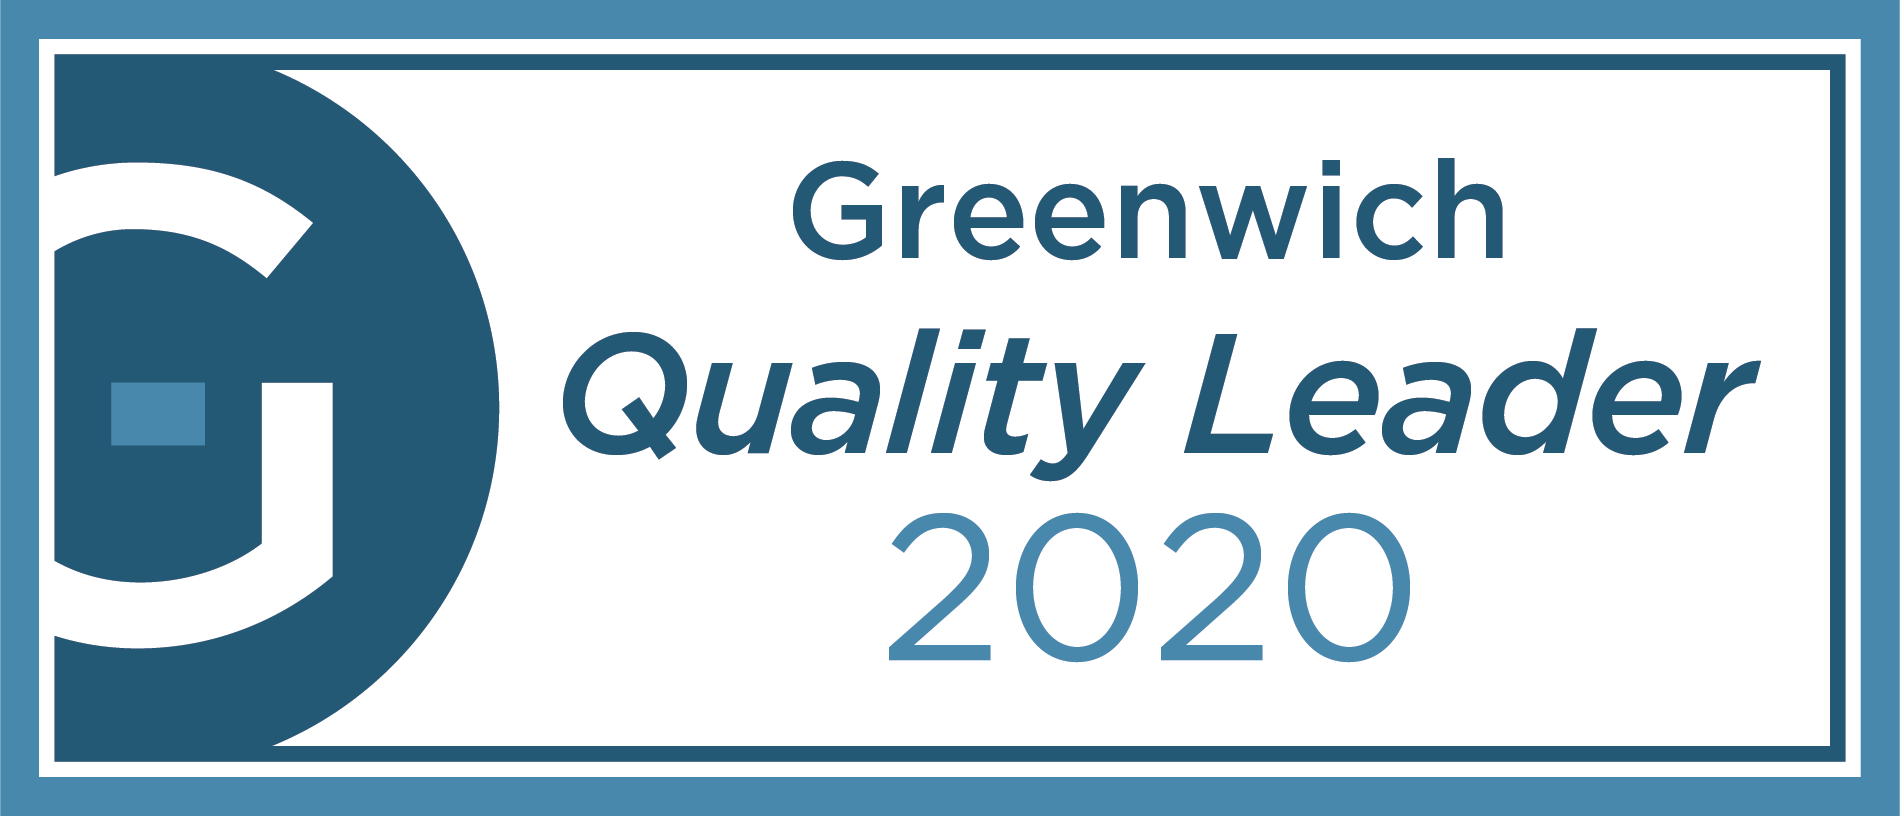 2020 Greenwhich Quality Leader in U.S. Institutional Investment Management Service.